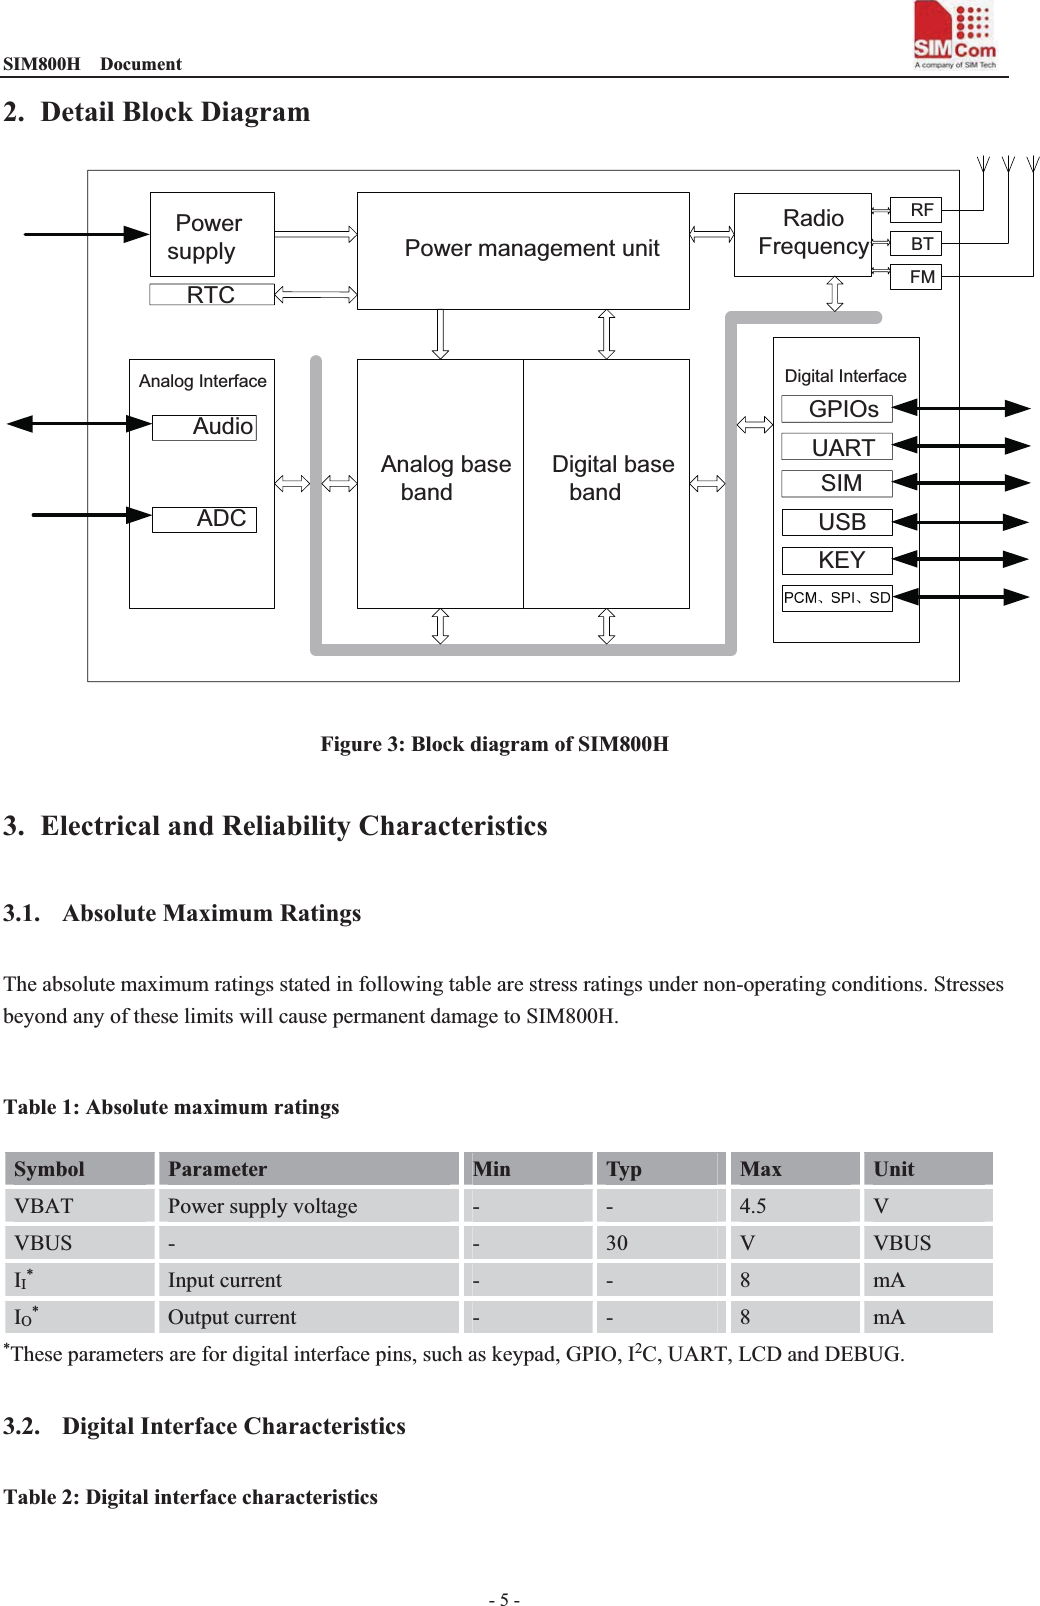 SIM800H  Document                                                                                - 5 - 2. Detail Block Diagram Analog base bandDigital base bandPower management unitRadio FrequencyPowersupplyAnalog Interface Digital InterfaceUARTSIMGPIOsRTCAudioADCRFBTFMUSBKEY Figure 3: Block diagram of SIM800H  3. Electrical and Reliability Characteristics 3.1. Absolute Maximum Ratings The absolute maximum ratings stated in following table are stress ratings under non-operating conditions. Stresses beyond any of these limits will cause permanent damage to SIM800H.  Table 1: Absolute maximum ratings Symbol Parameter Min Typ  Max Unit VBAT  Power supply voltage  -  -  4.5  V VBUS  -  -  30  V  VBUS II* Input current  -  -  8  mA IO* Output current  -  -  8  mA *These parameters are for digital interface pins, such as keypad, GPIO, I2C, UART, LCD and DEBUG. 3.2. Digital Interface Characteristics Table 2: Digital interface characteristicsȱ